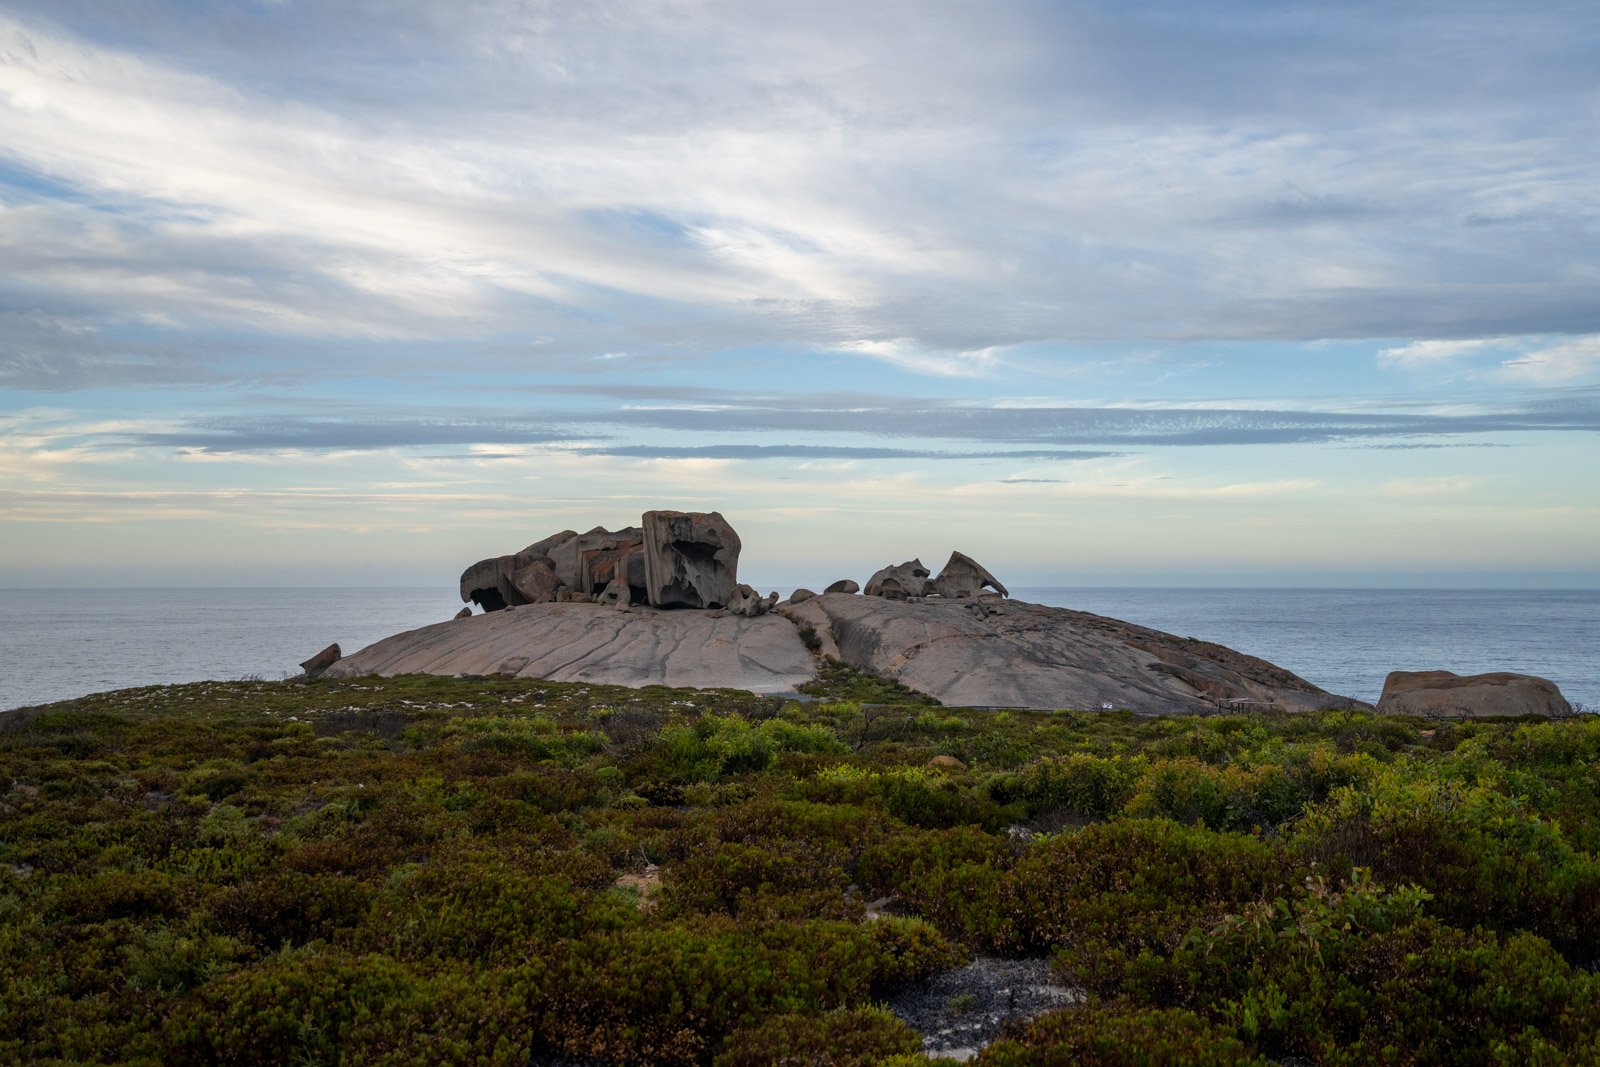 Remarkable Rocks early morning